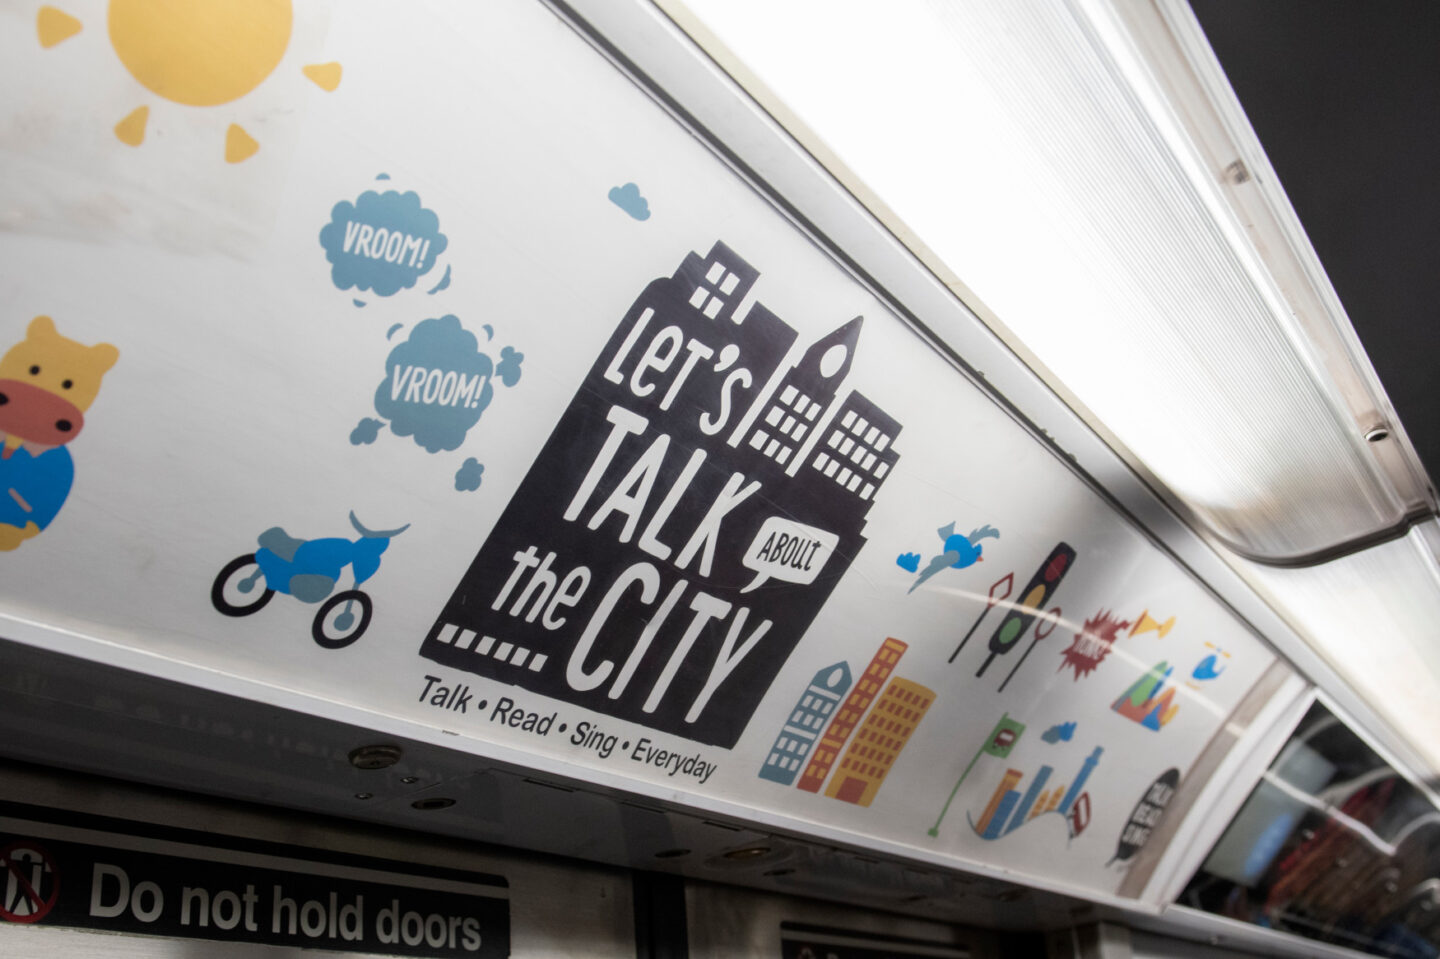 A subway ad featuring illustrations and conversations prompt. In the middle it says, "Let's talk about the city" and "Talk. Read. Sing. Everyday."